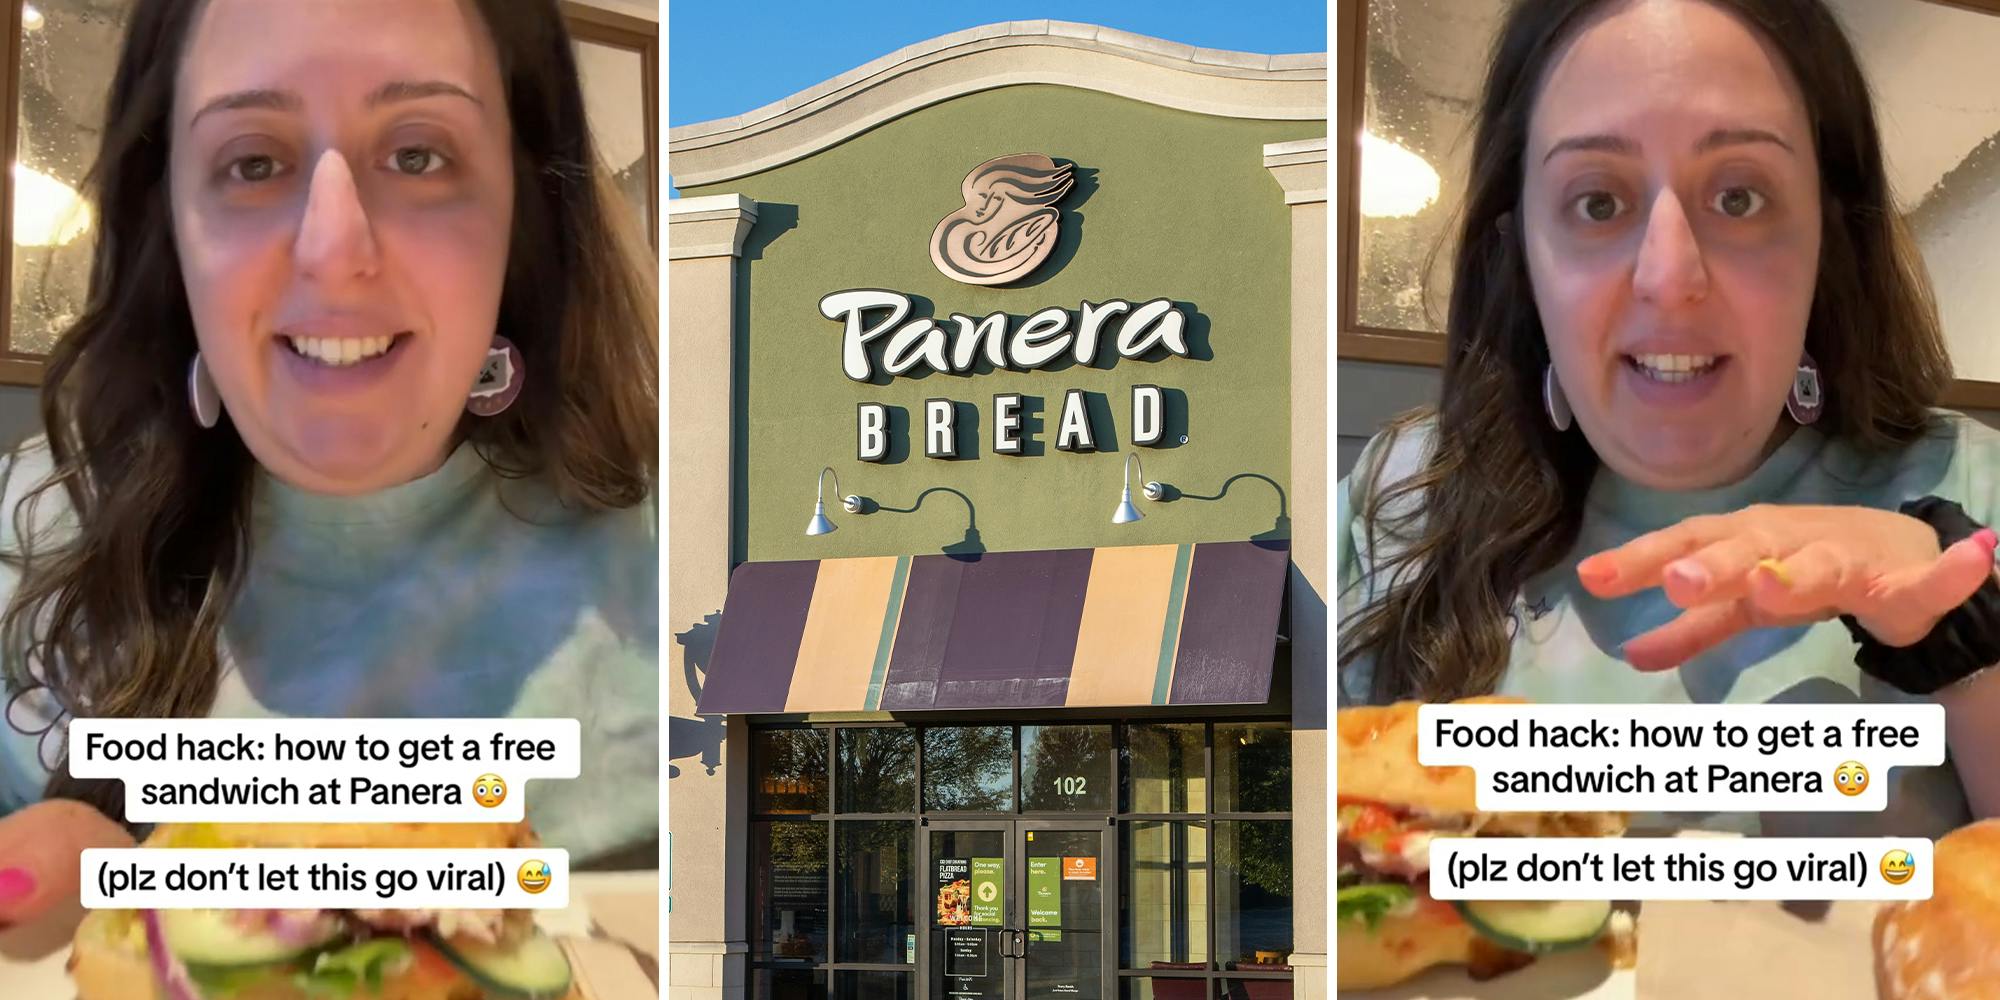 ‘Usually with the You Pick 2 you only get a half-sandwich’: Panera customer reveals trick to get ‘free’ full-size sandwich